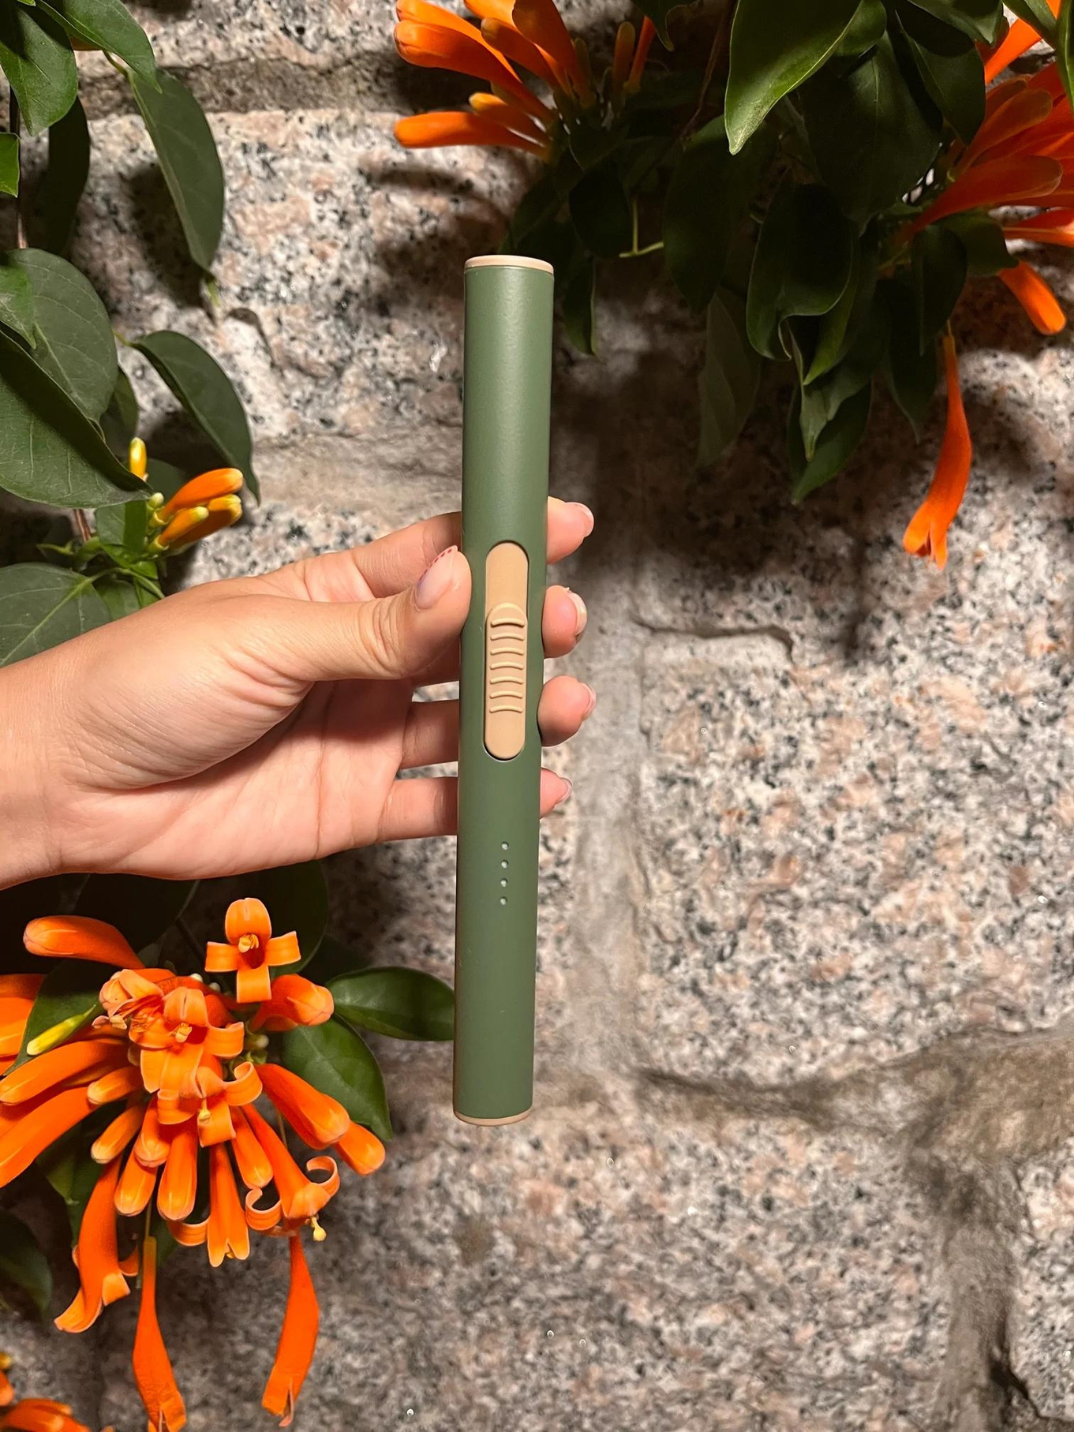 This lighter tackles single-use lighter industry with a more sustainable option eco-friendly burn-free rechargeable lighter